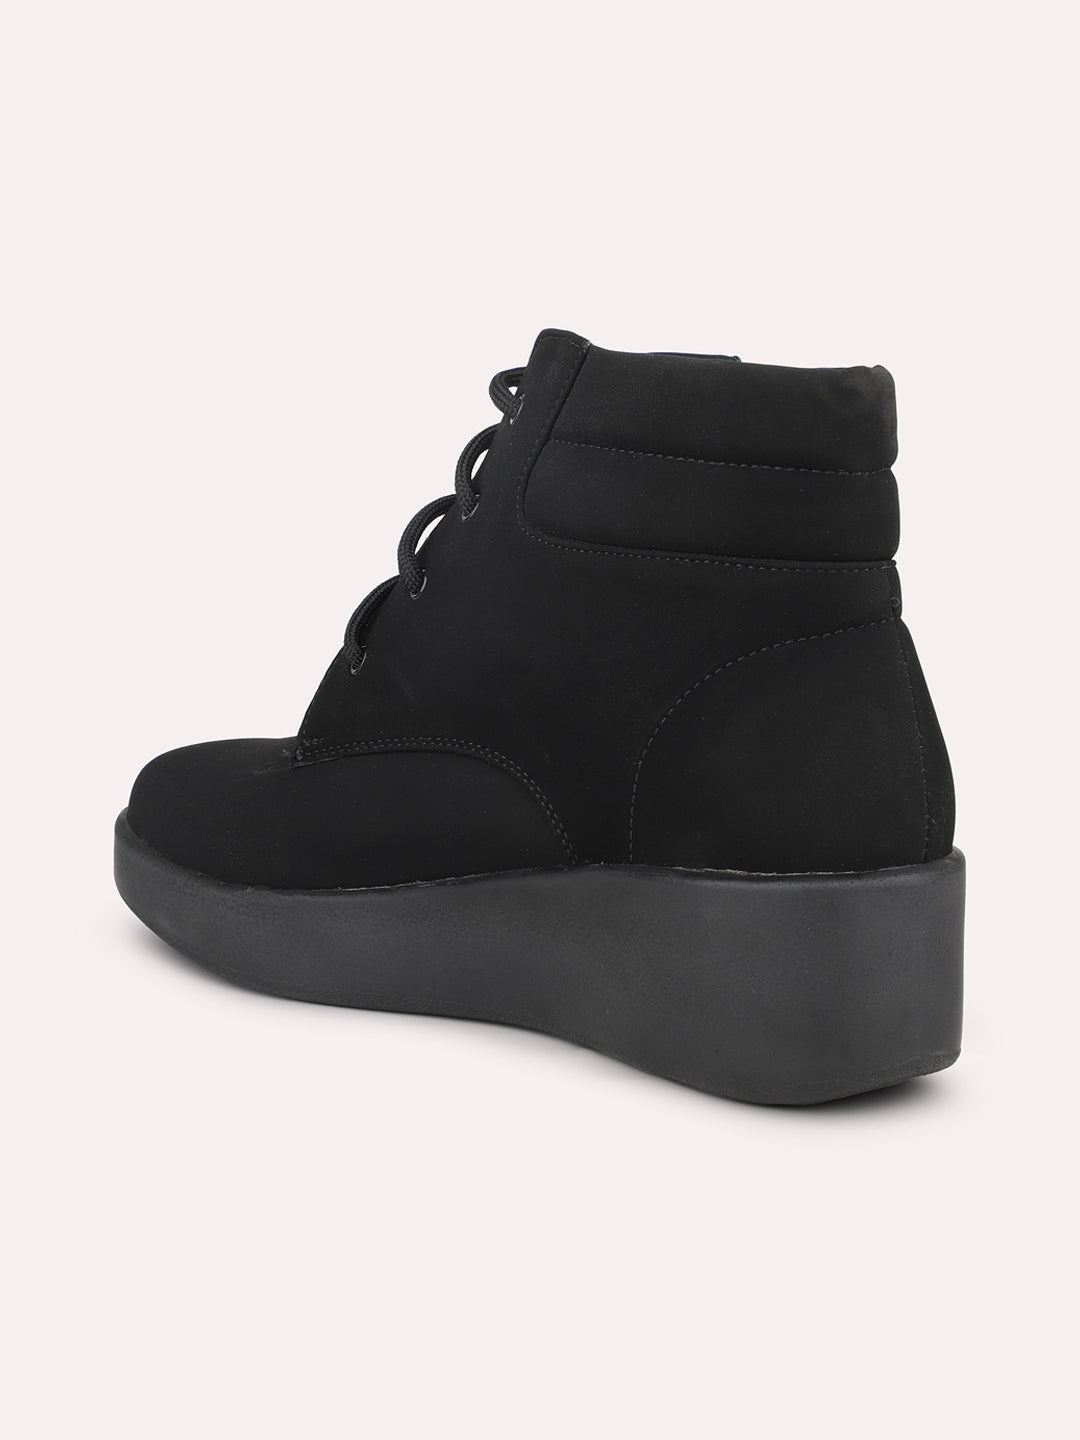 Women Lace-Ups Mid-Top Wedge Regular Boots